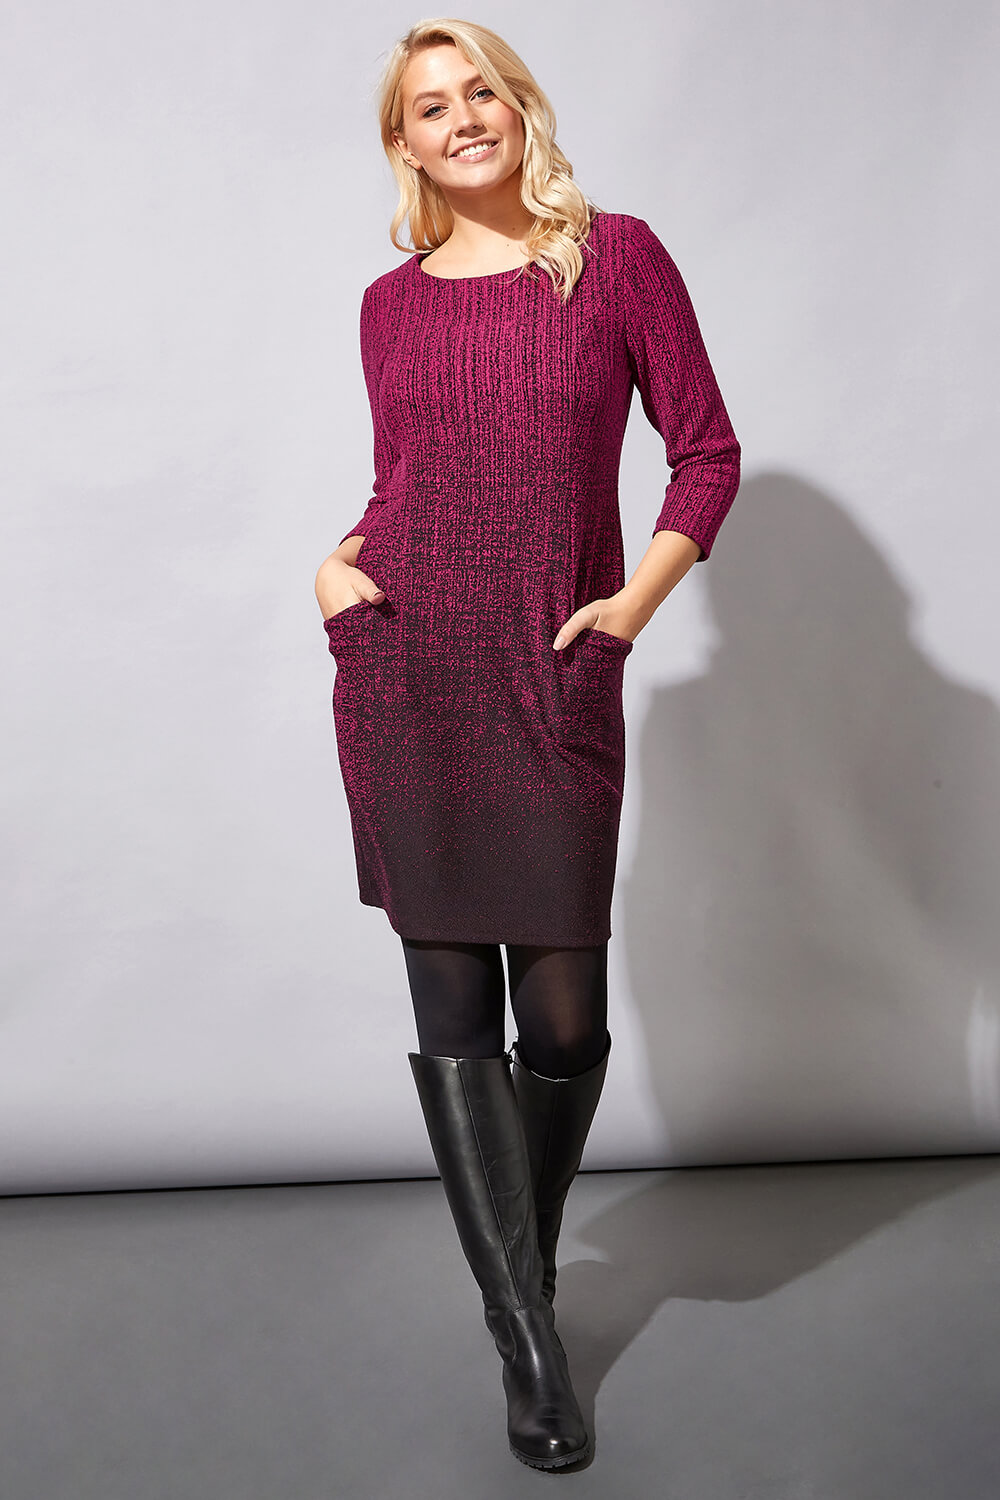 Fuchsia Ombre Textured Shift Dress, Image 2 of 4